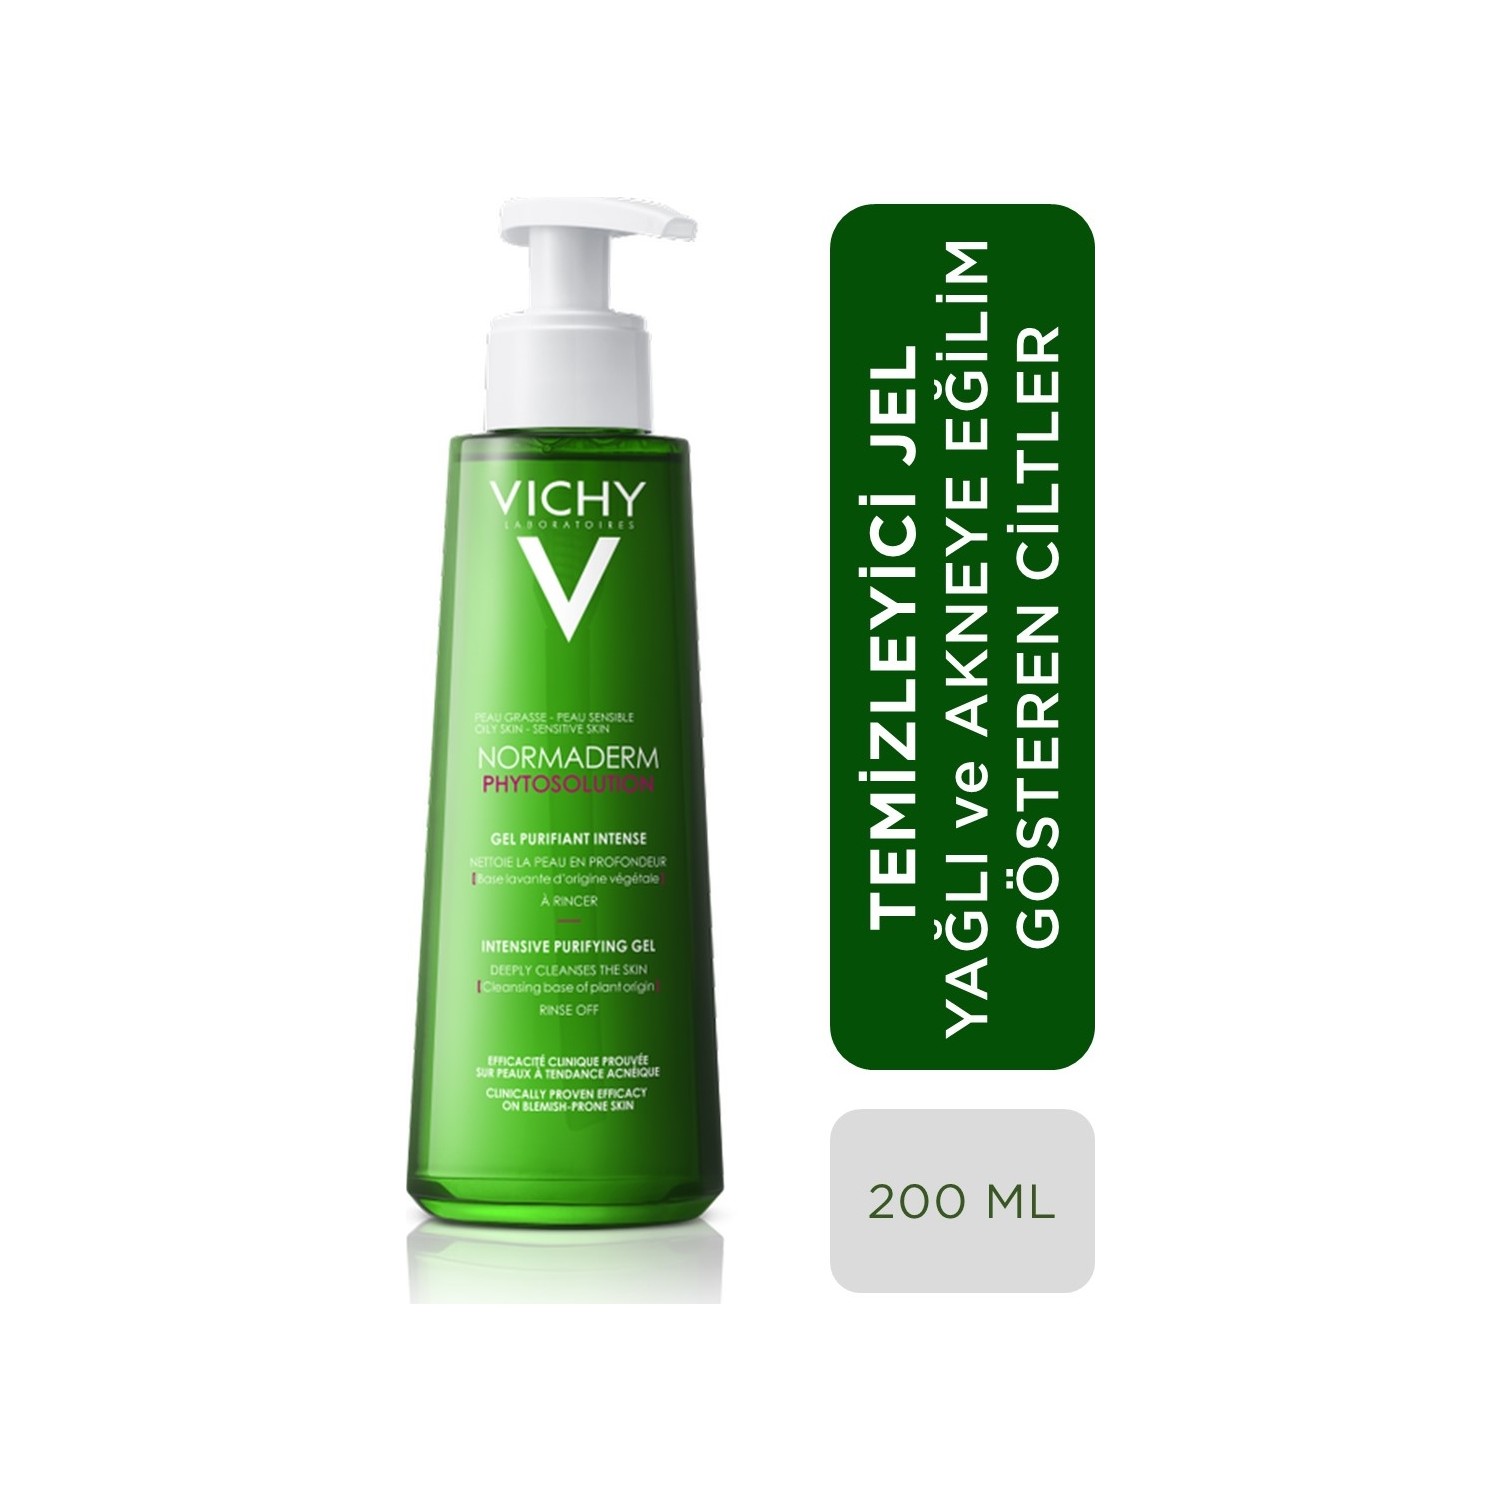 Vichy Normaderm. Виши Нормадерм phytosolution. Vichy гель Normaderm phytosolution Intensive Purifying Gel, 200 мл. Vichy Normaderm phytosolution гель пробник. Intensive purifying gel